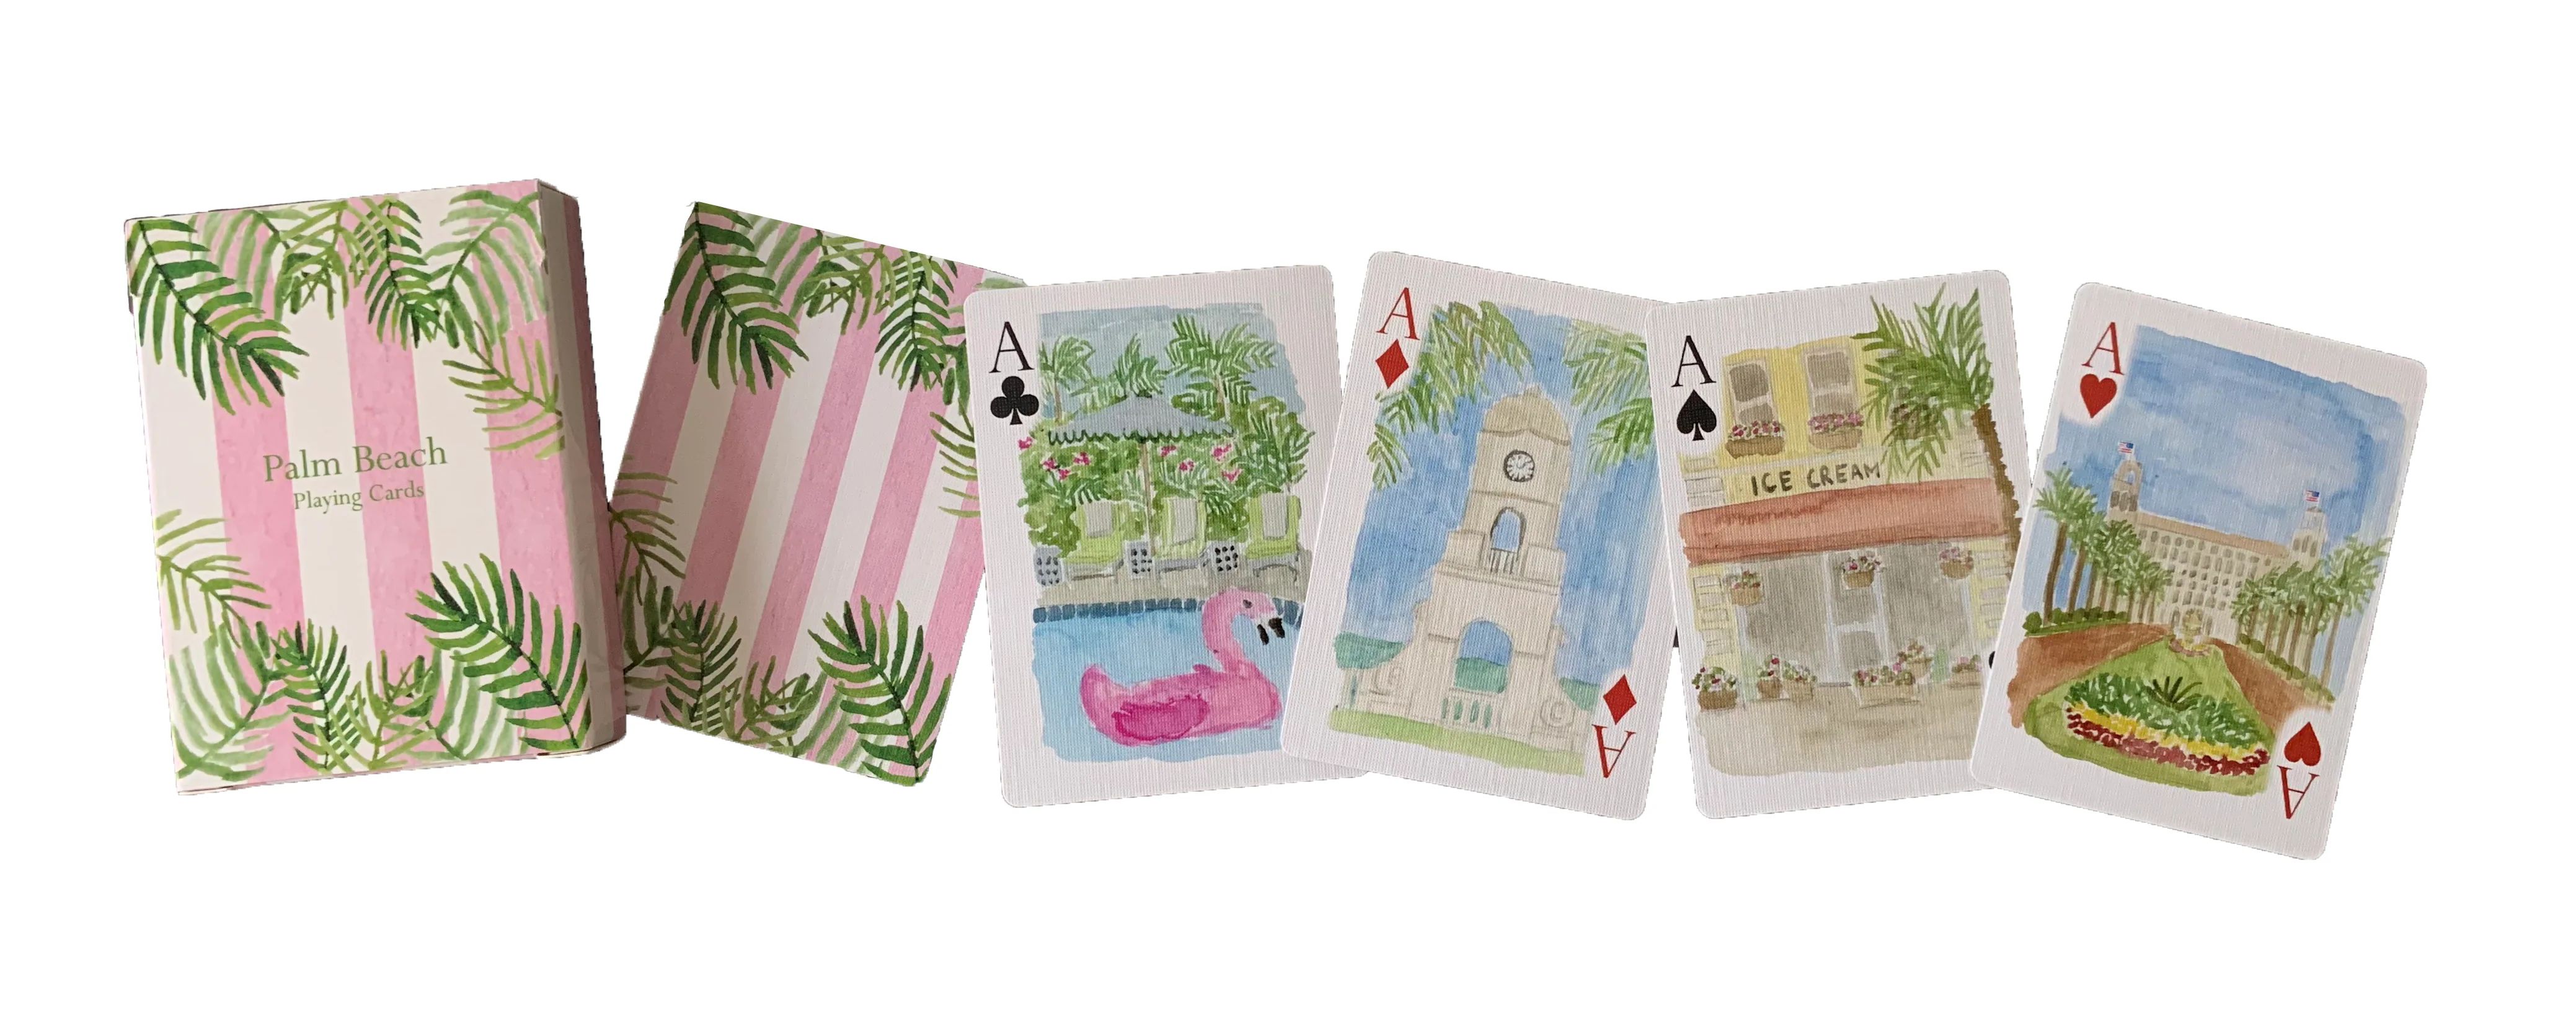 Palm Beach Playing Cards | LouLou Baker